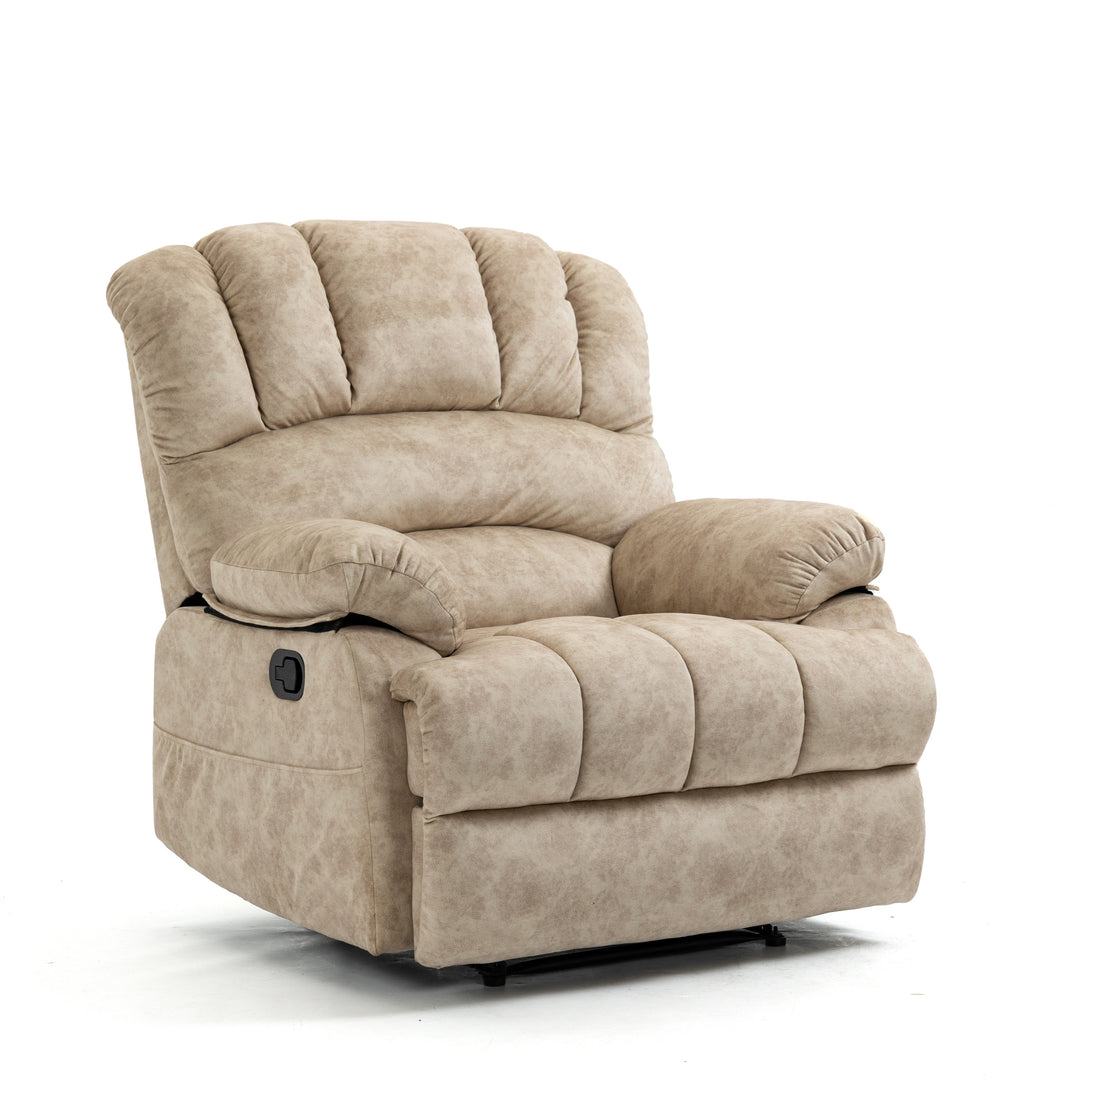 Large Manual Recliner Chair in Fabric for Living Room beige-velvet-manual-handle-metal-primary living